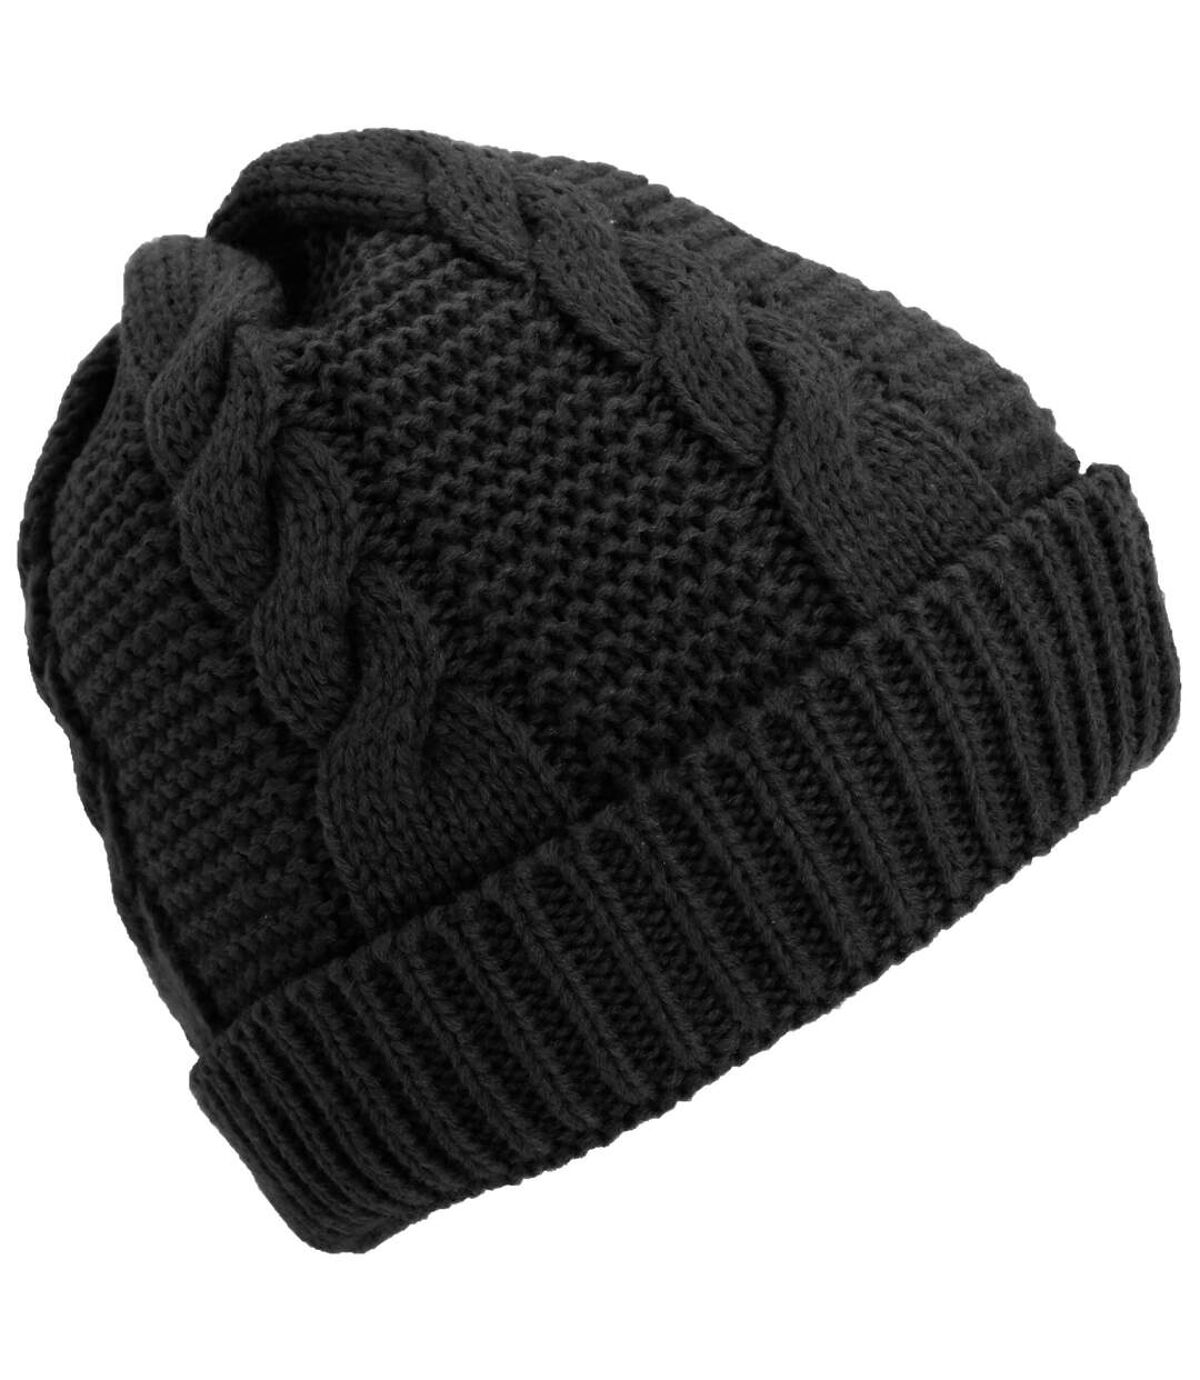 Ladies/Womens Cable Knit Fleece Lined Winter Beanie Hat (Black) - UTHA515